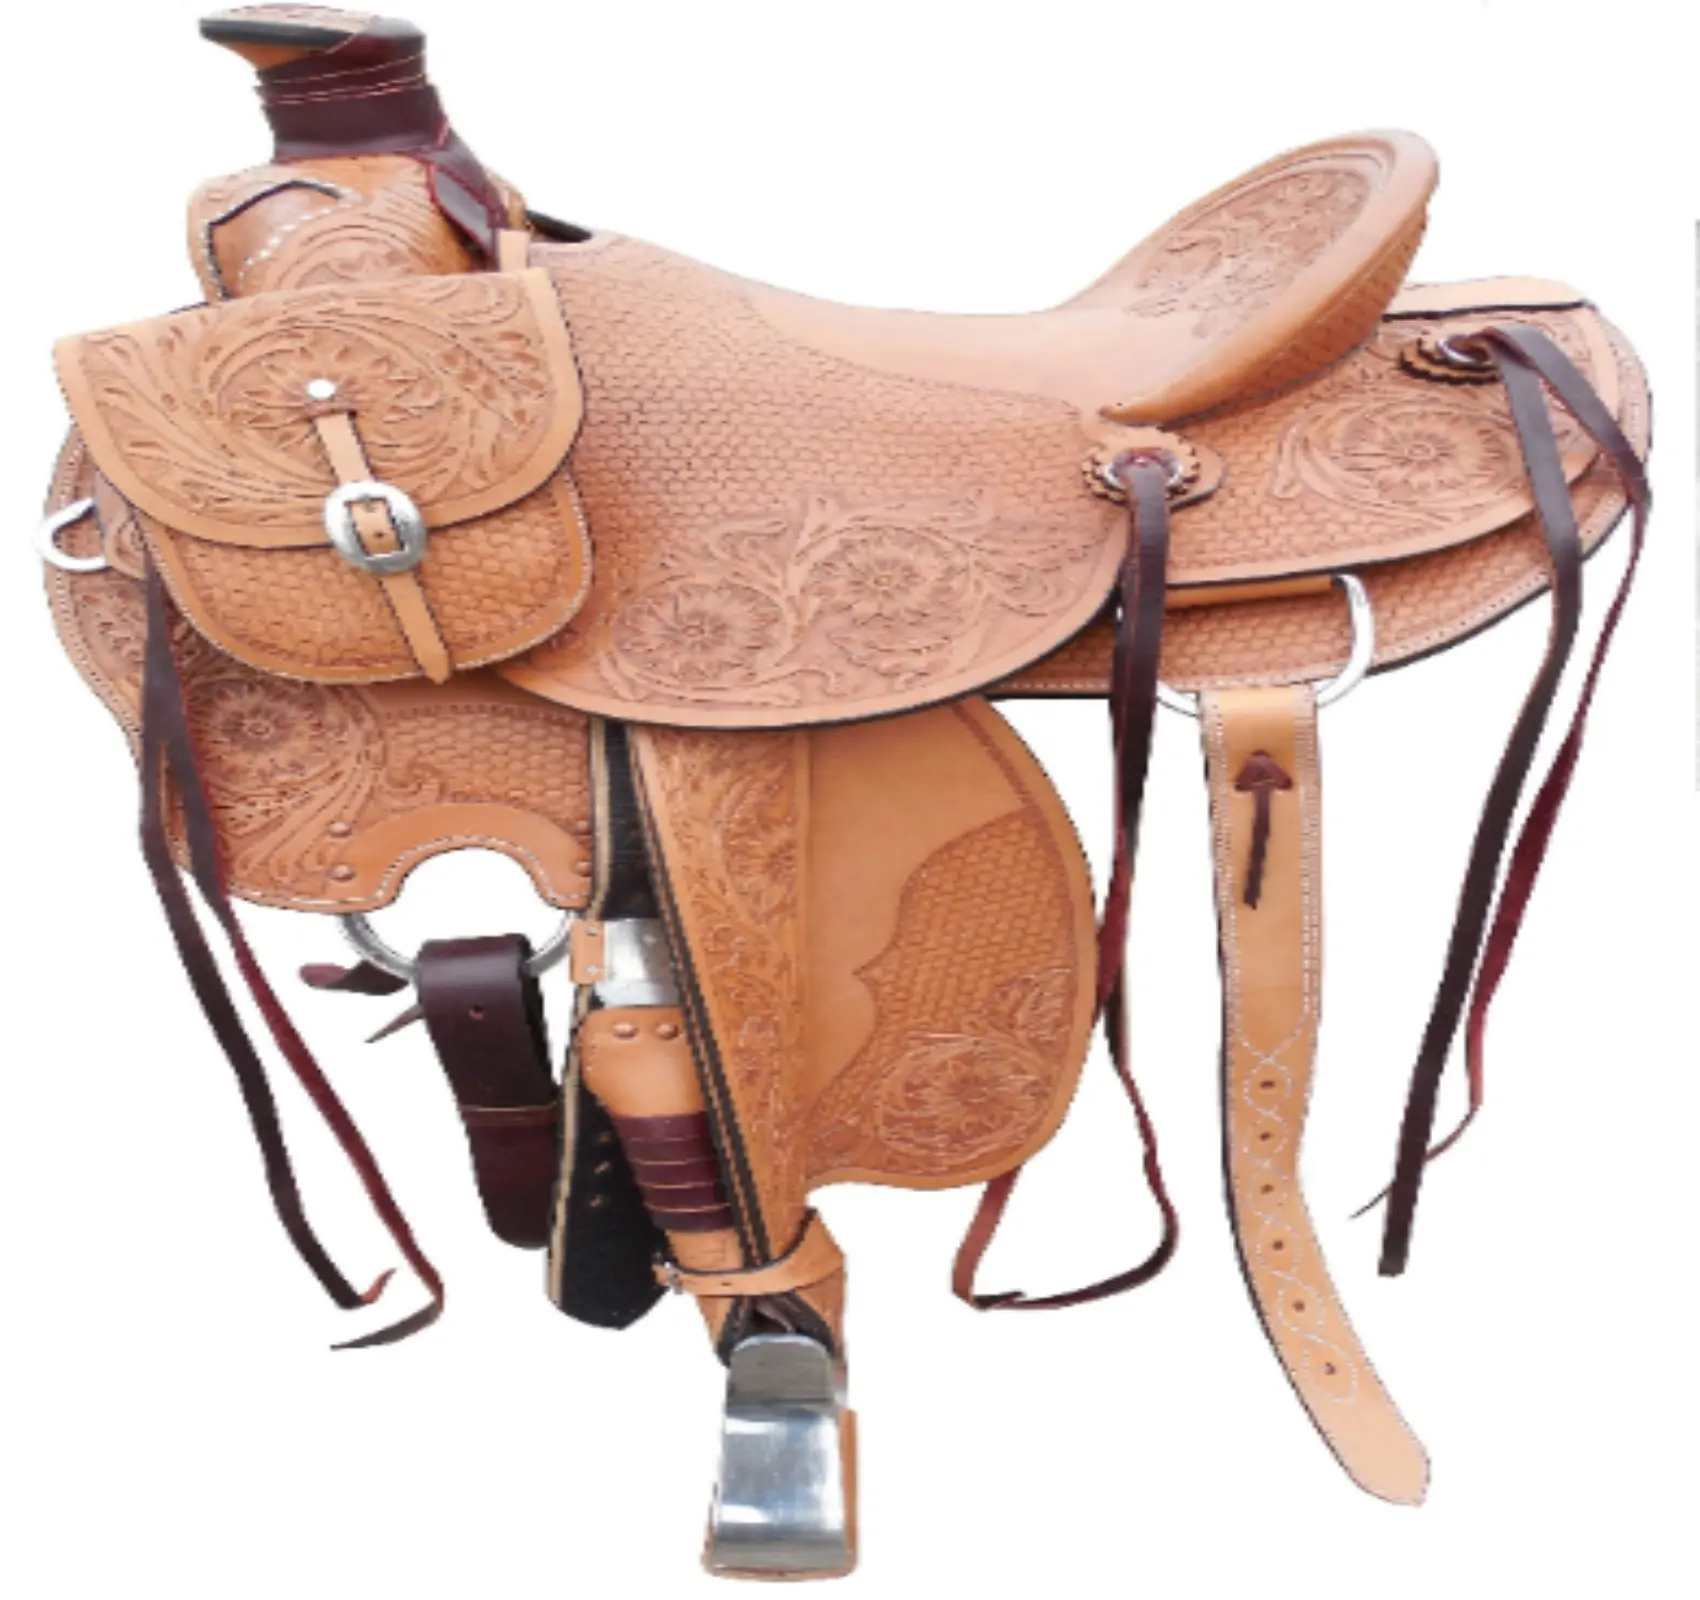 Western Roping Leather Made Smart Horse Saddle With Floral Hand Tooled And Hand Engraved Available In Wood And Fiber Glass Tree